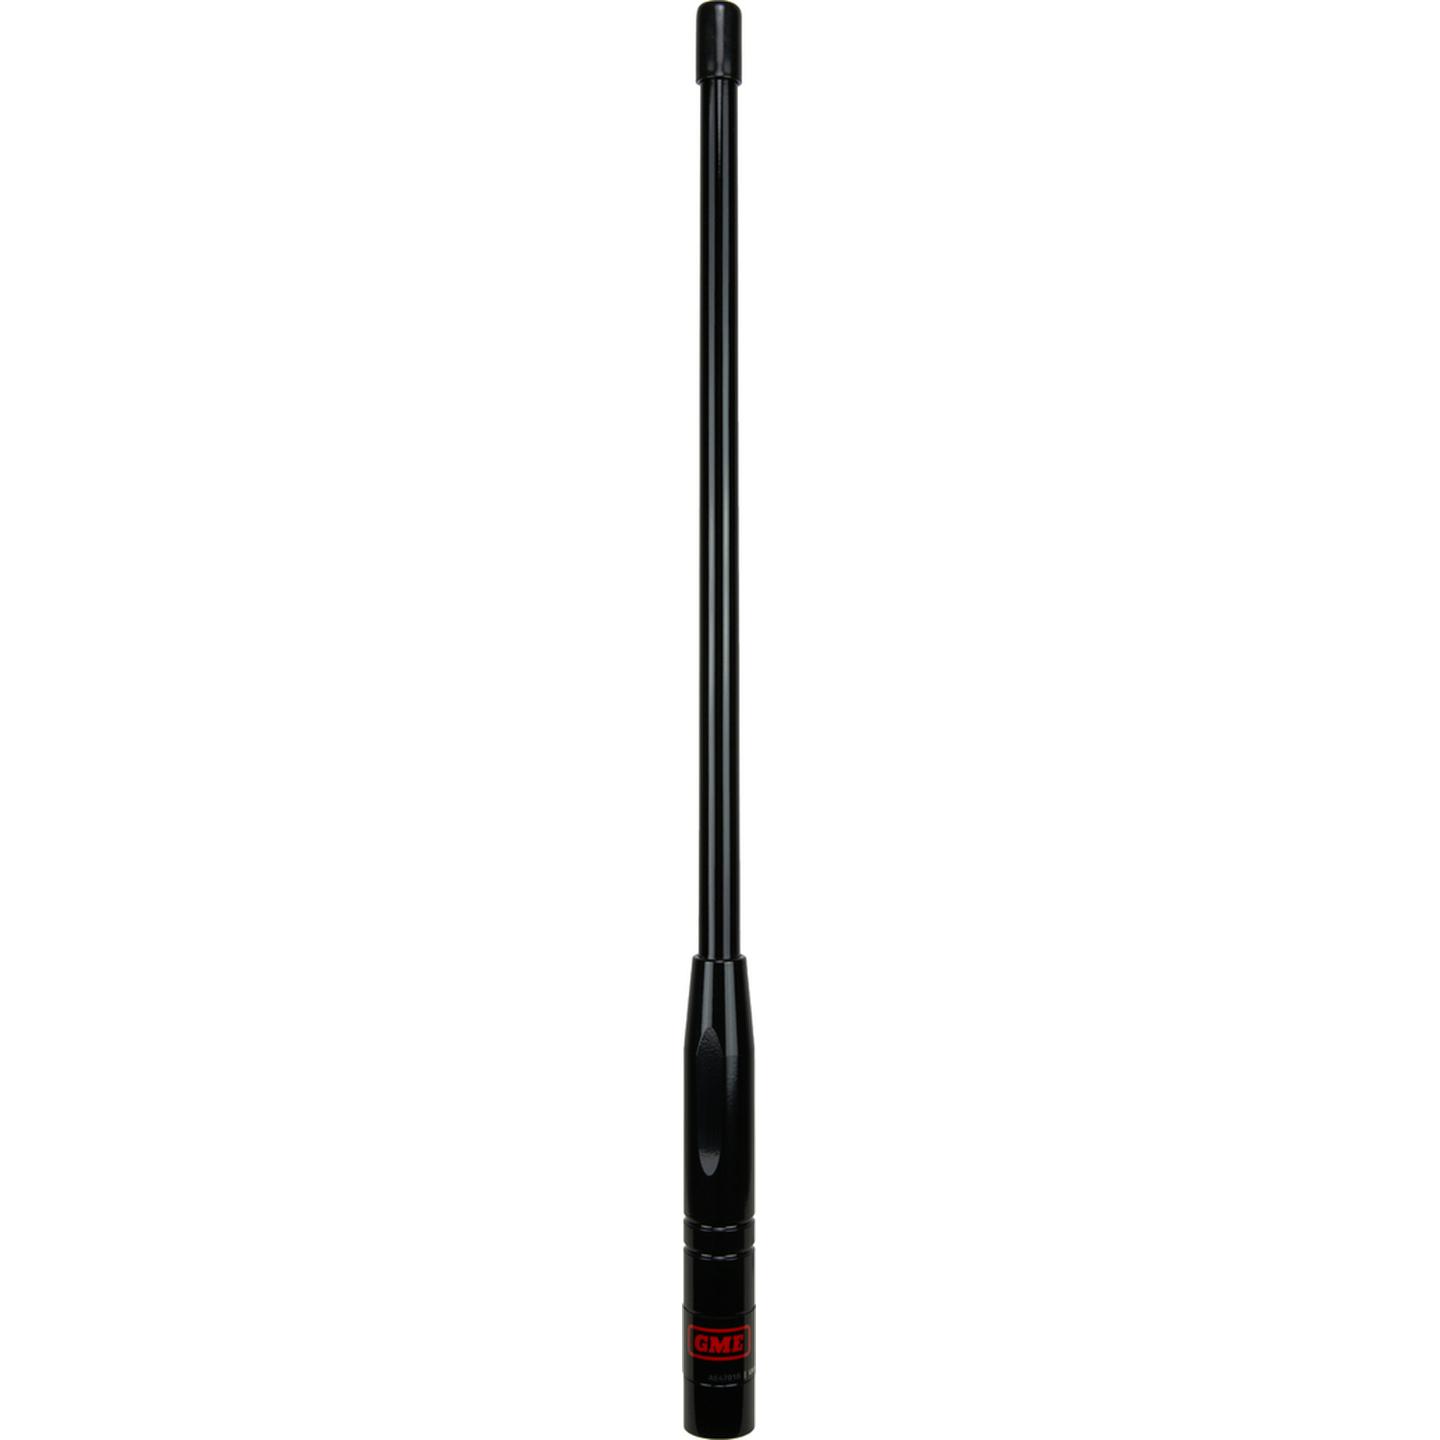 GME Antenna Whip - Suit AE4701 - Black